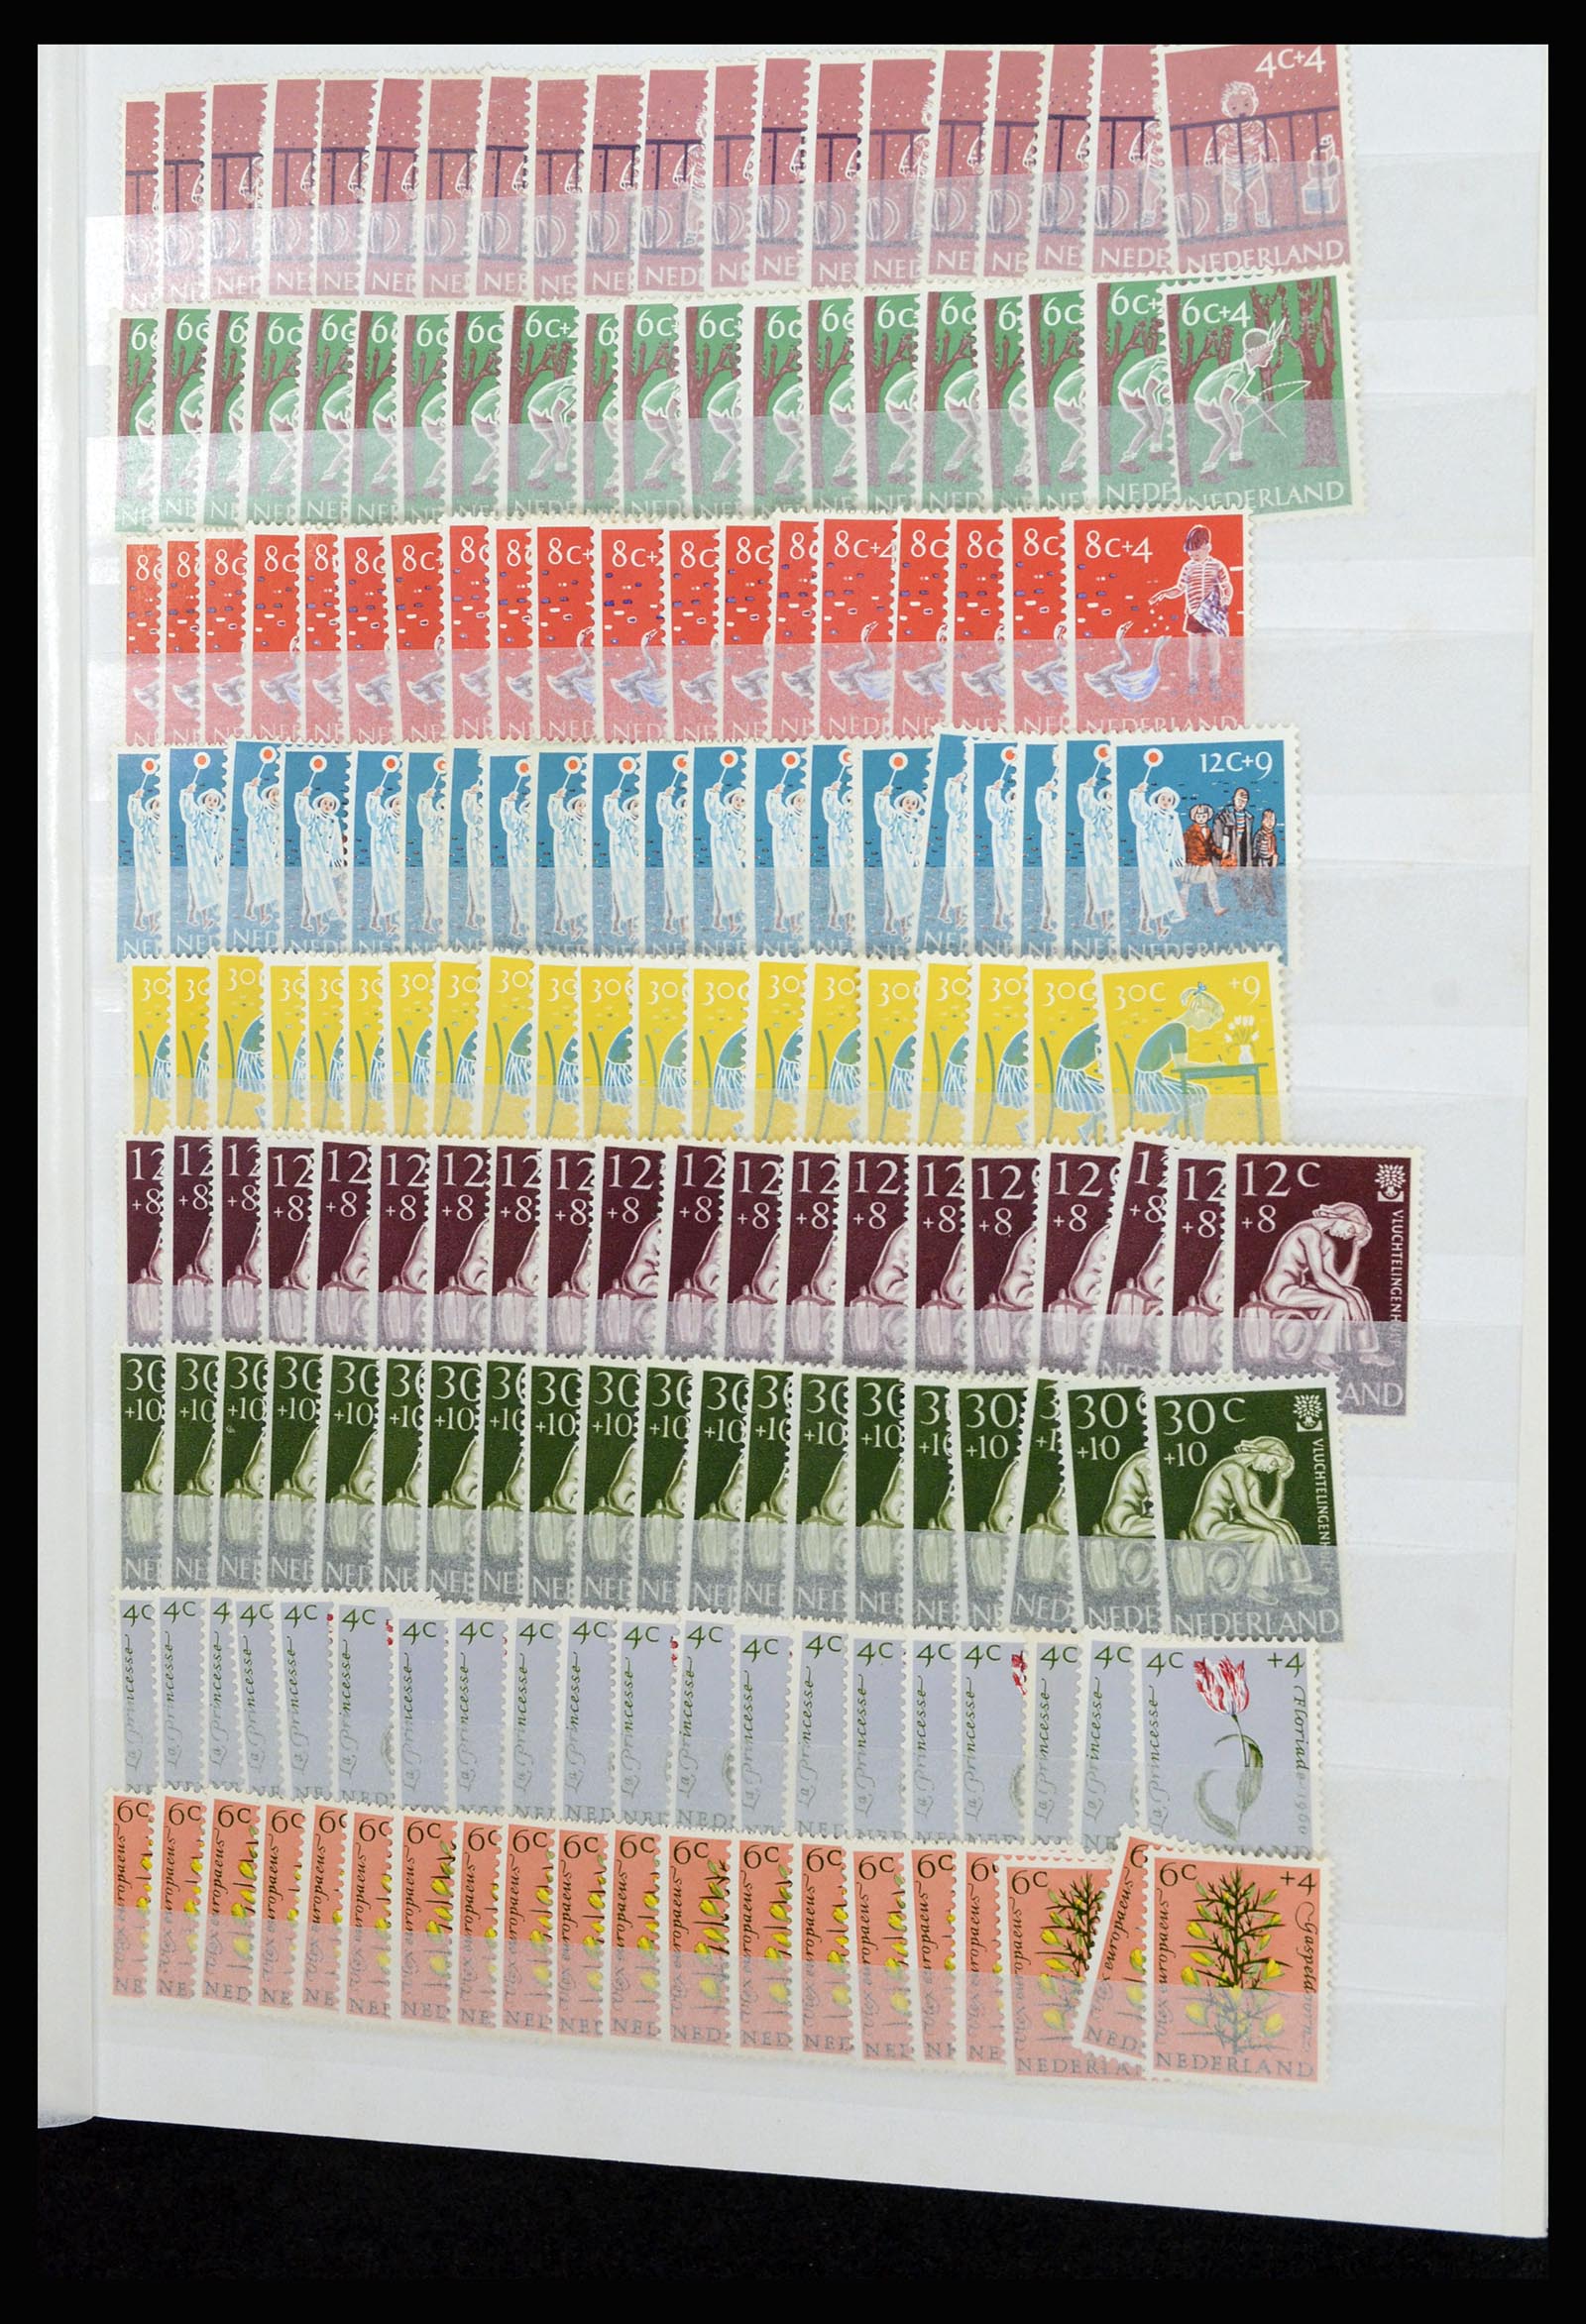 37043 003 - Stamp collection 37043 Netherlands 1958-1974.